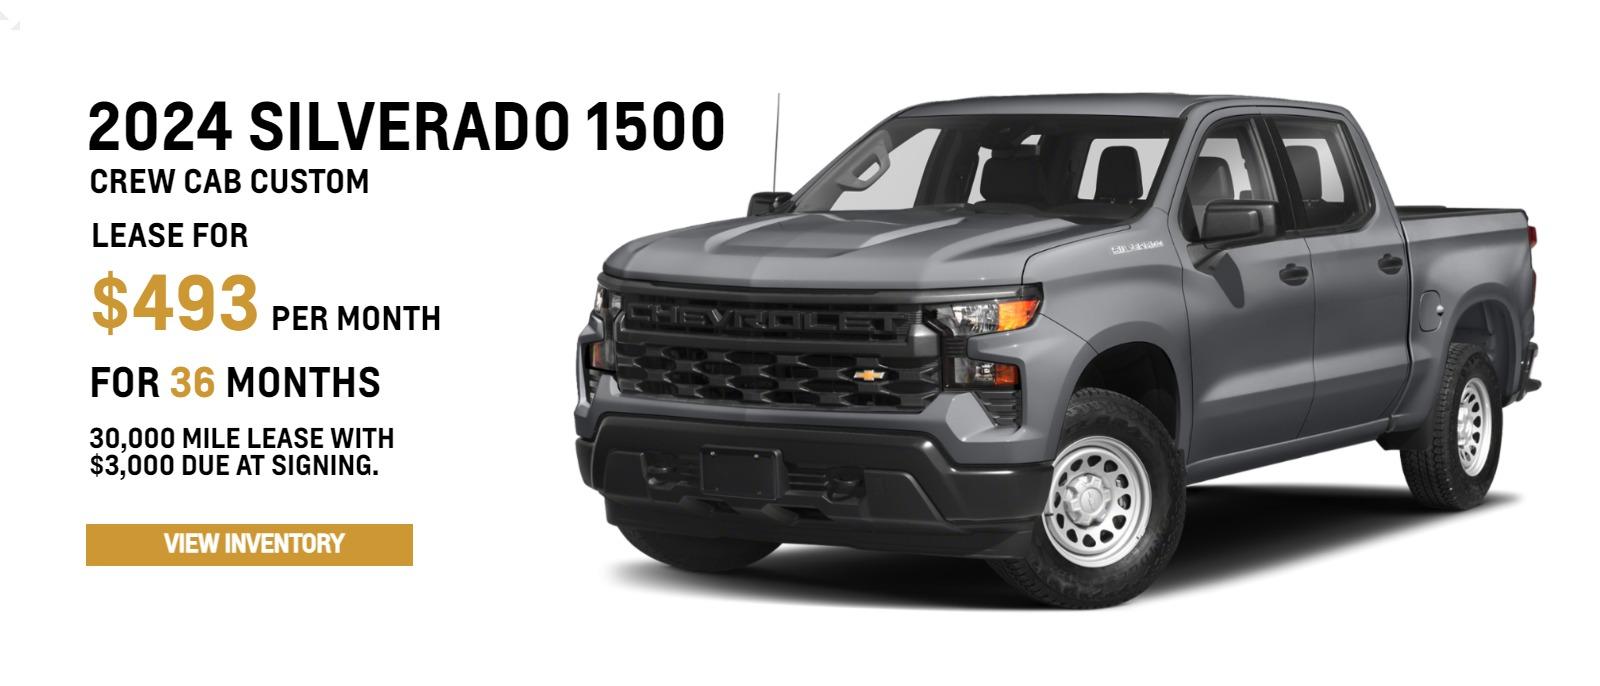 New 2024 Silverado 1500 crew cab Custom lease for $493/month. This is a 36 month, 30,000 mile lease with $3000 due at signing.